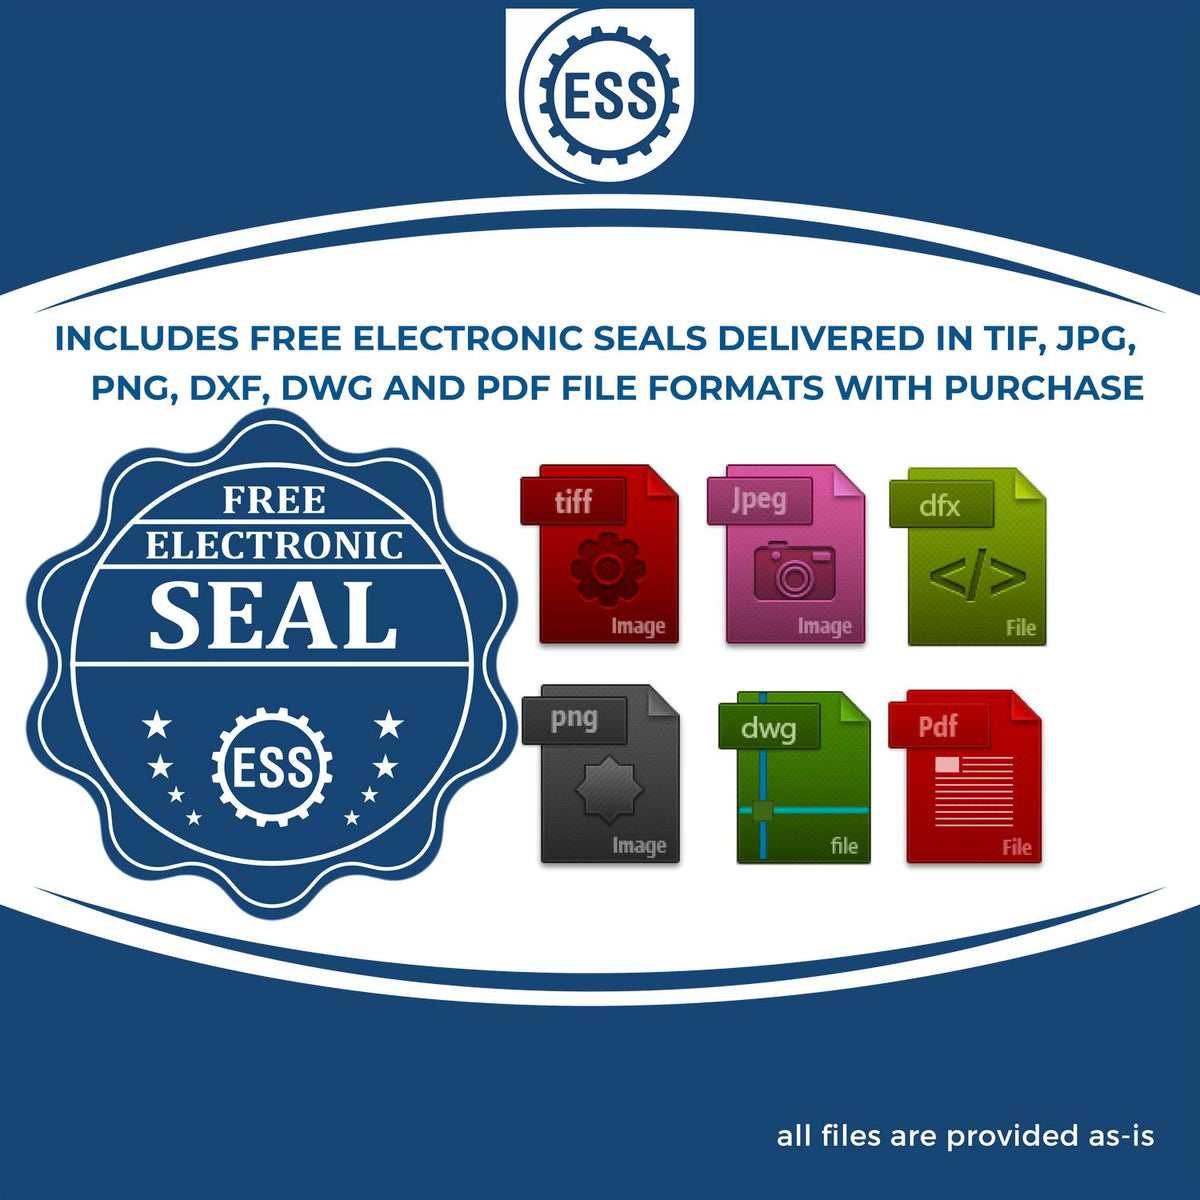 An infographic for the free electronic seal for the Slim Pre-Inked Connecticut Professional Engineer Seal Stamp illustrating the different file type icons such as DXF, DWG, TIF, JPG and PNG.